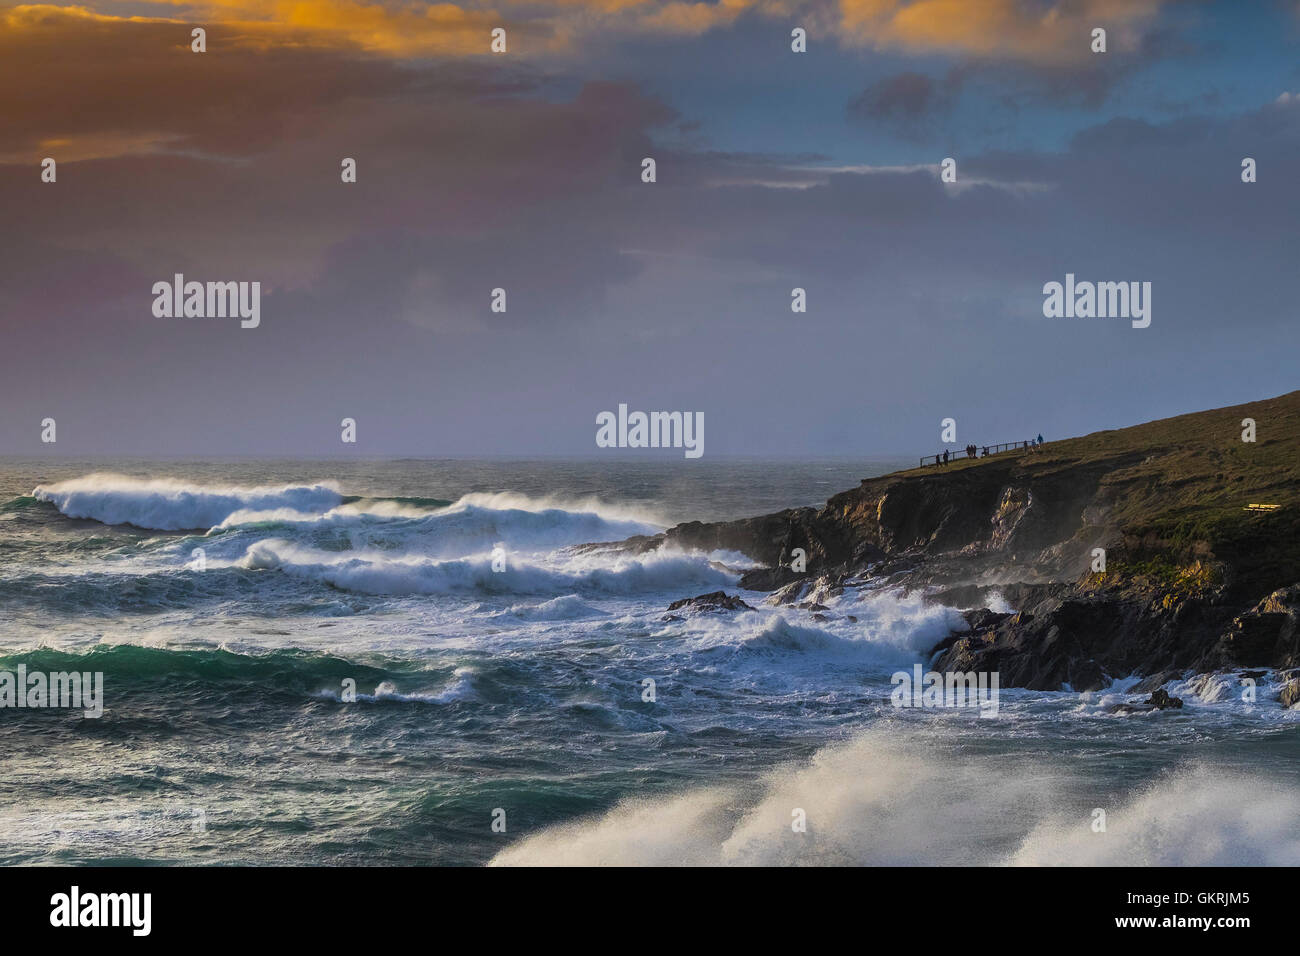 Gale force winds and wild weather drive large waves onto the rocks at Towan Headland in Newquay, Cornwall. Stock Photo